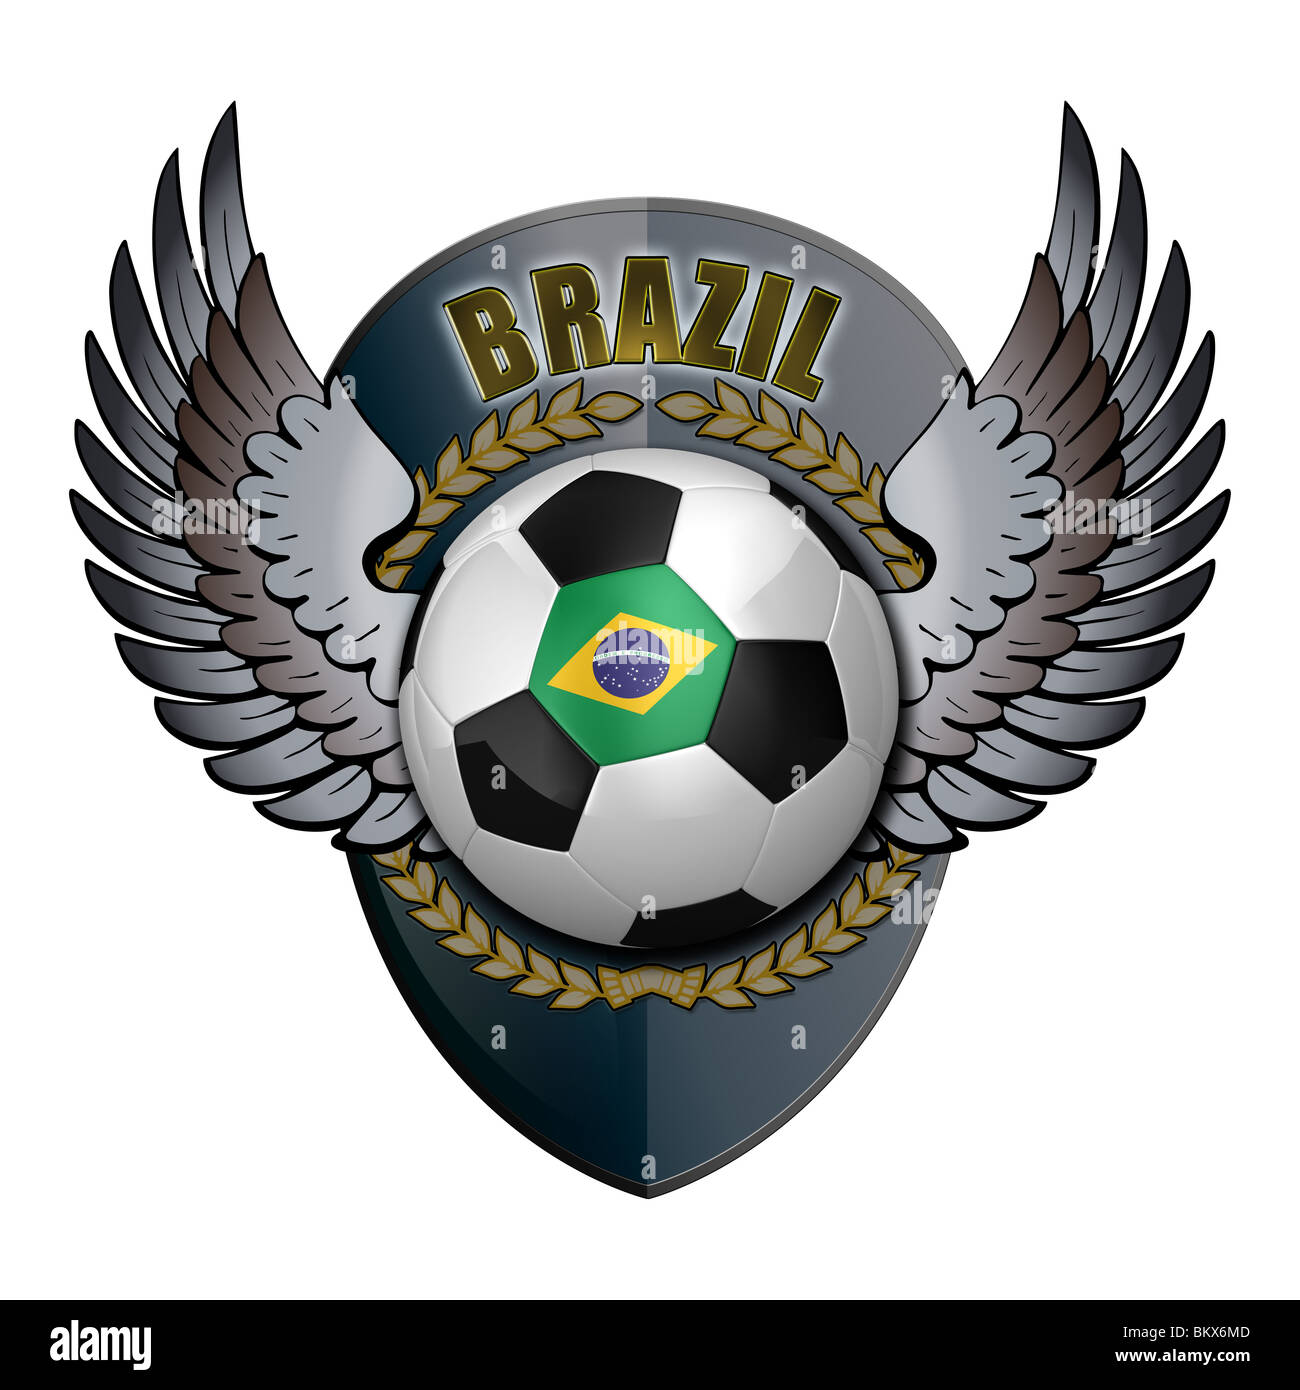 Brazilian soccer ball with crest Stock Photo